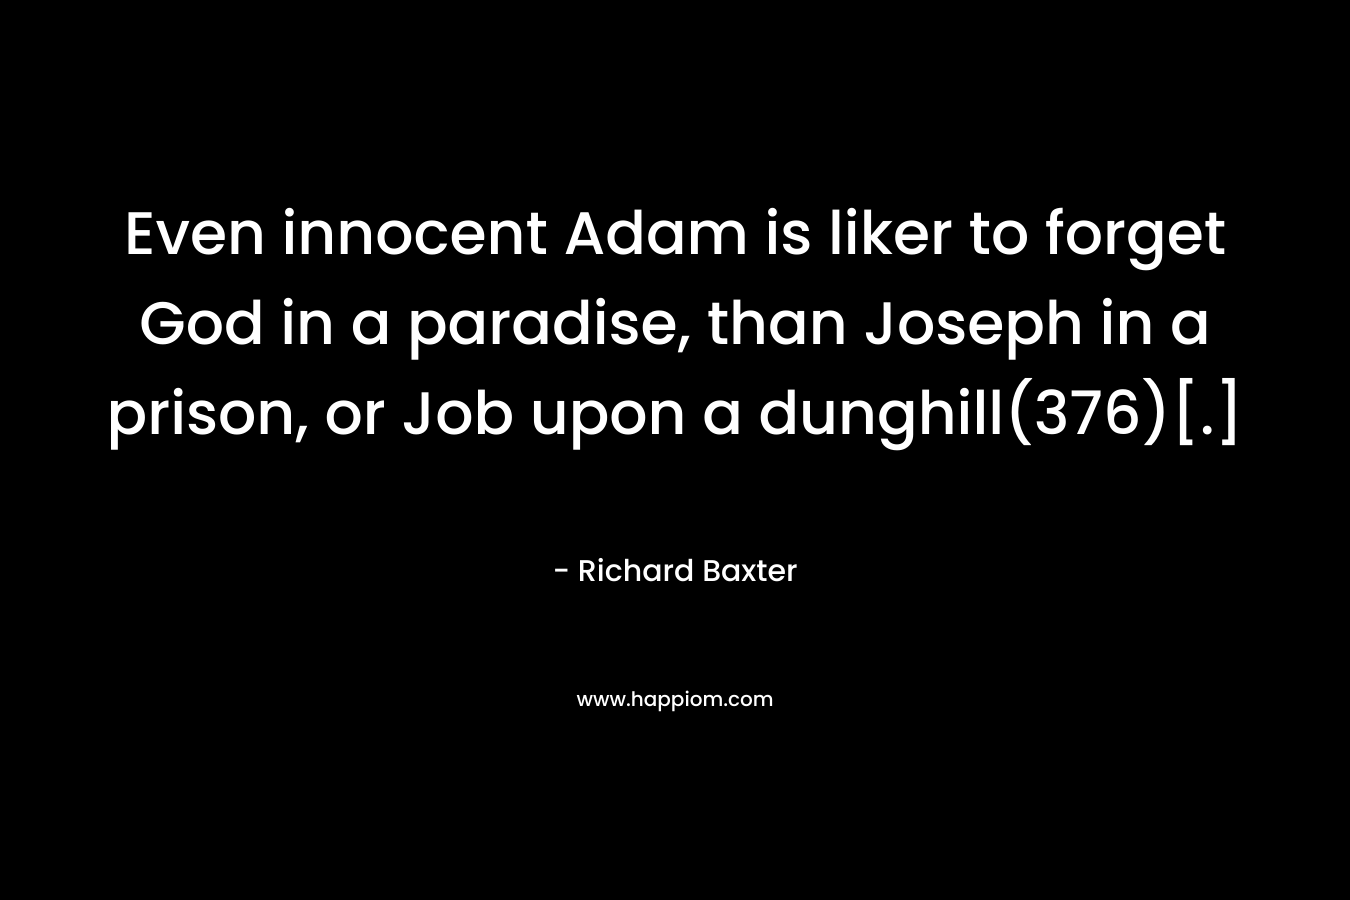 Even innocent Adam is liker to forget God in a paradise, than Joseph in a prison, or Job upon a dunghill(376)[.]